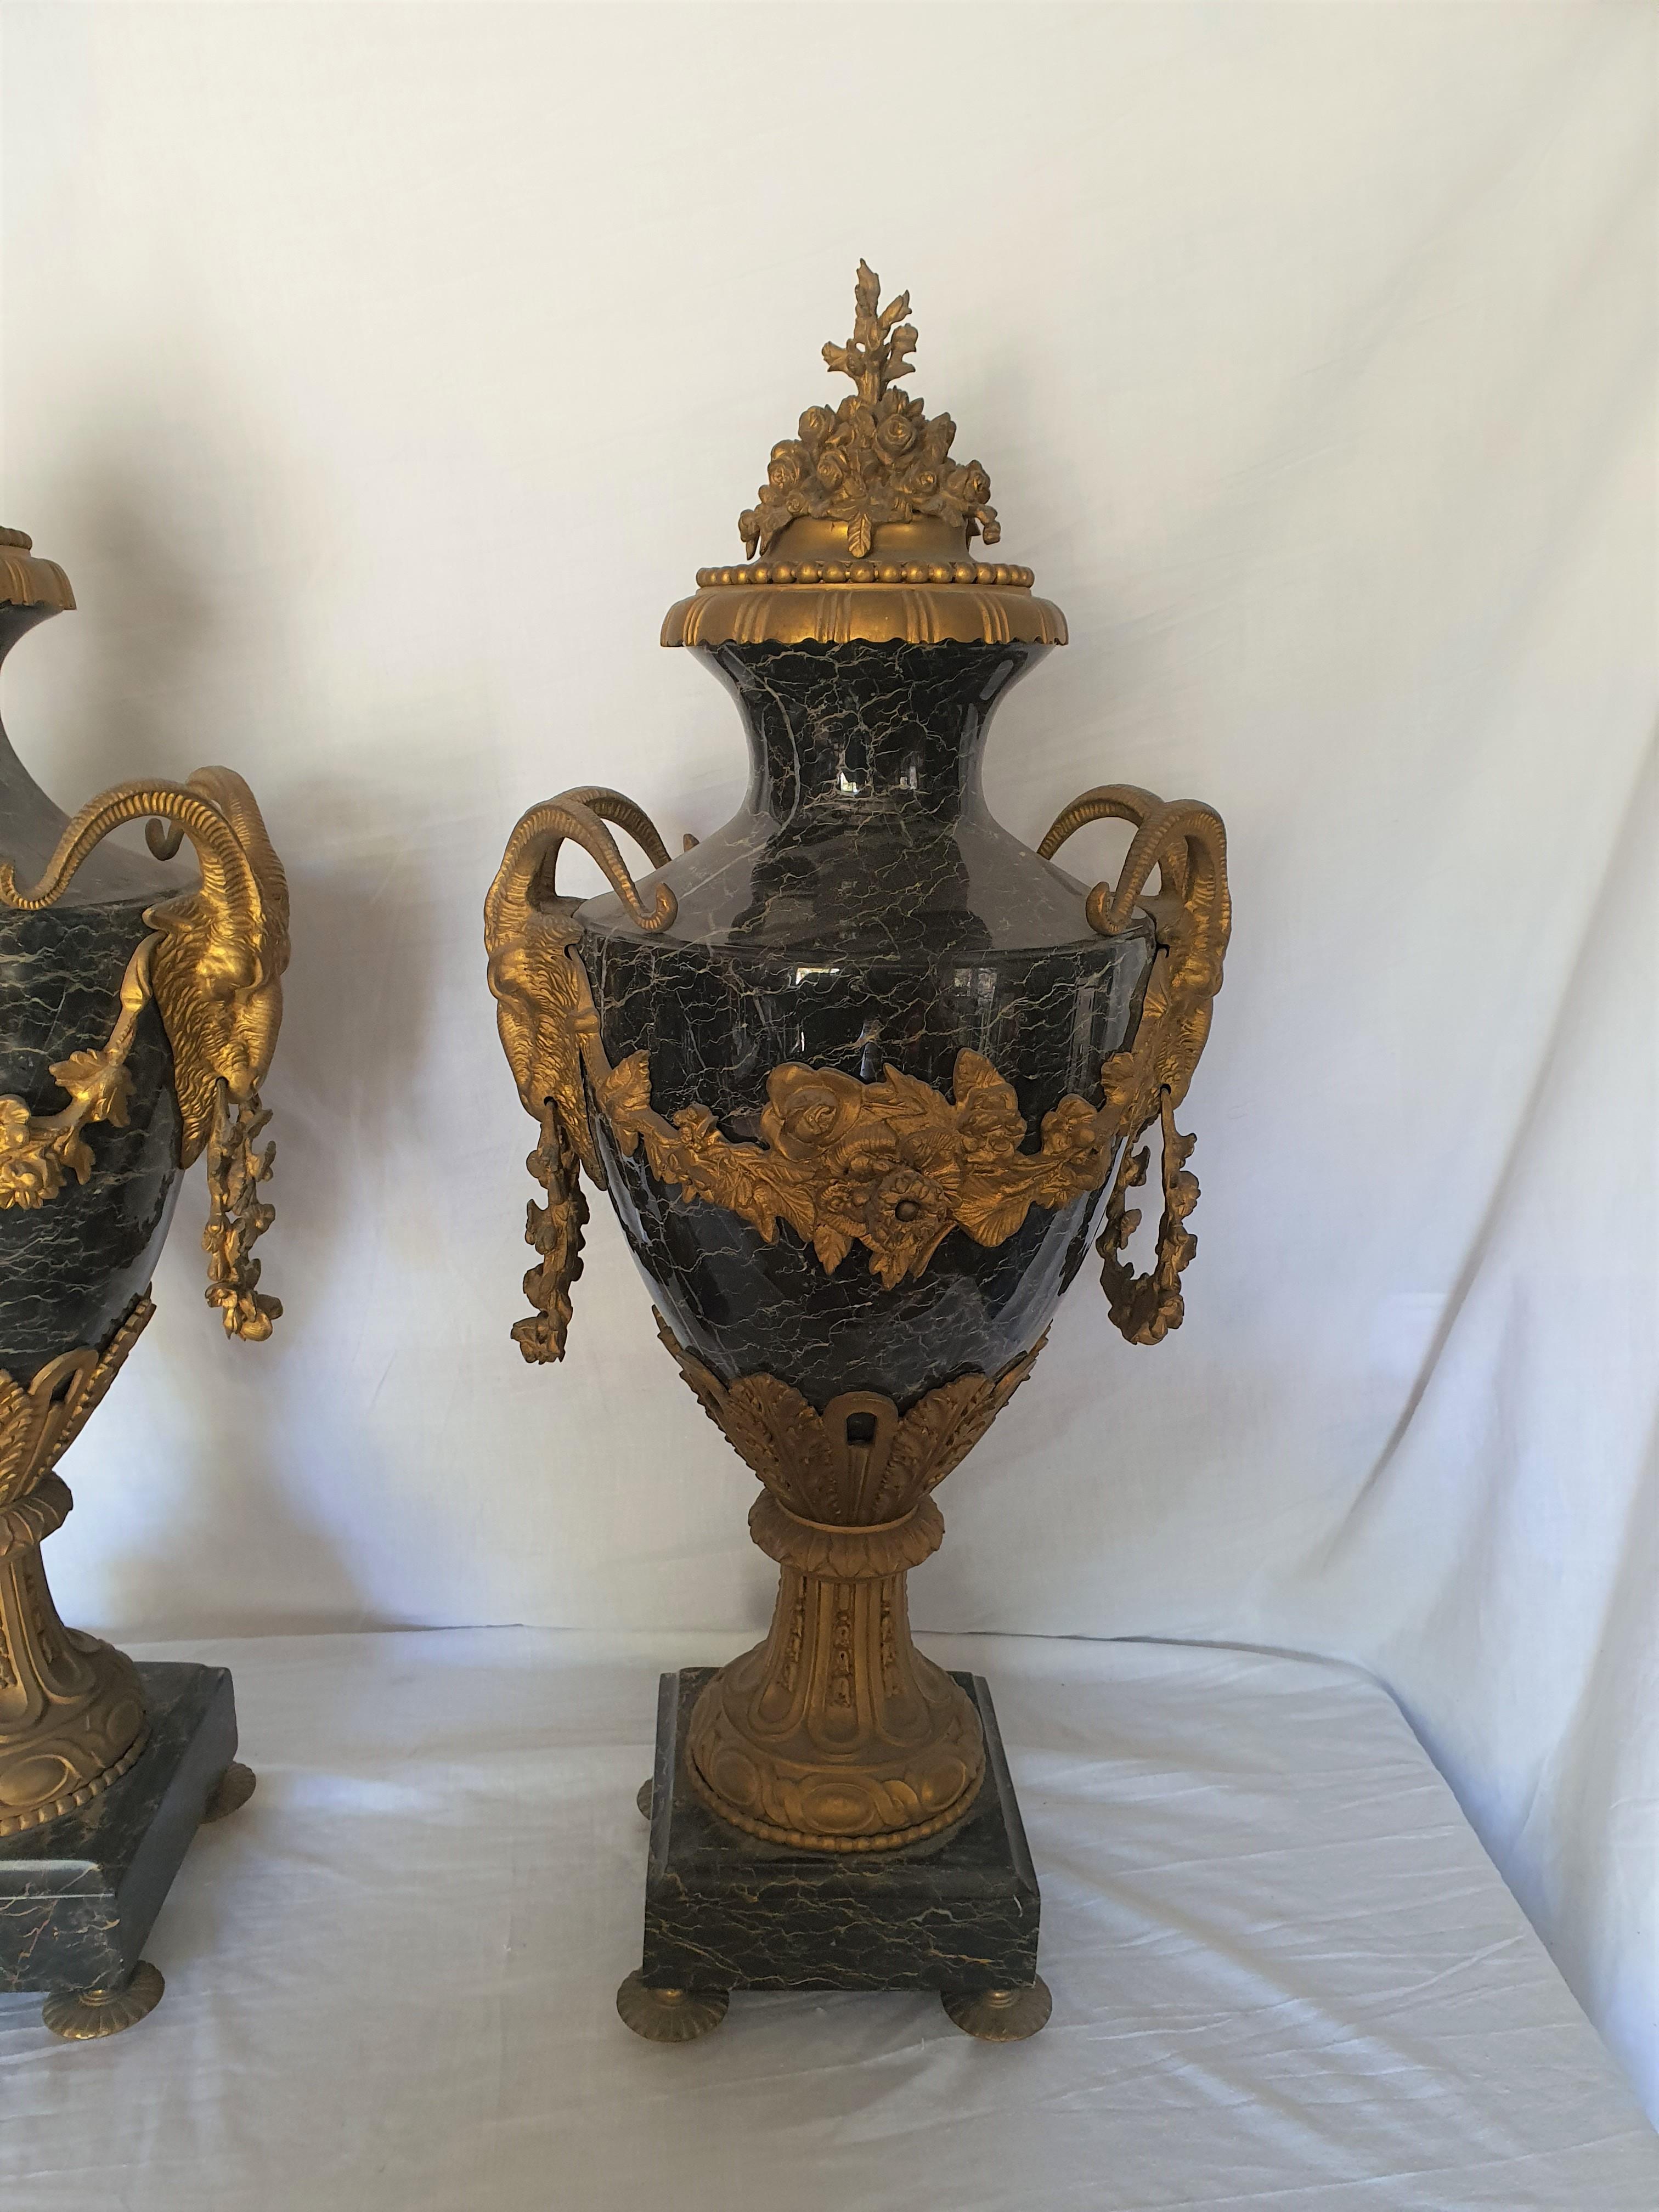 Elegant pair of marble vases, with applications in finely chiseled and gilded bronze. Goat heads, finely chiseled, support the side handles. Particular workmanship in the upper part, finely chiseled and gilded bronze with a floral motif.